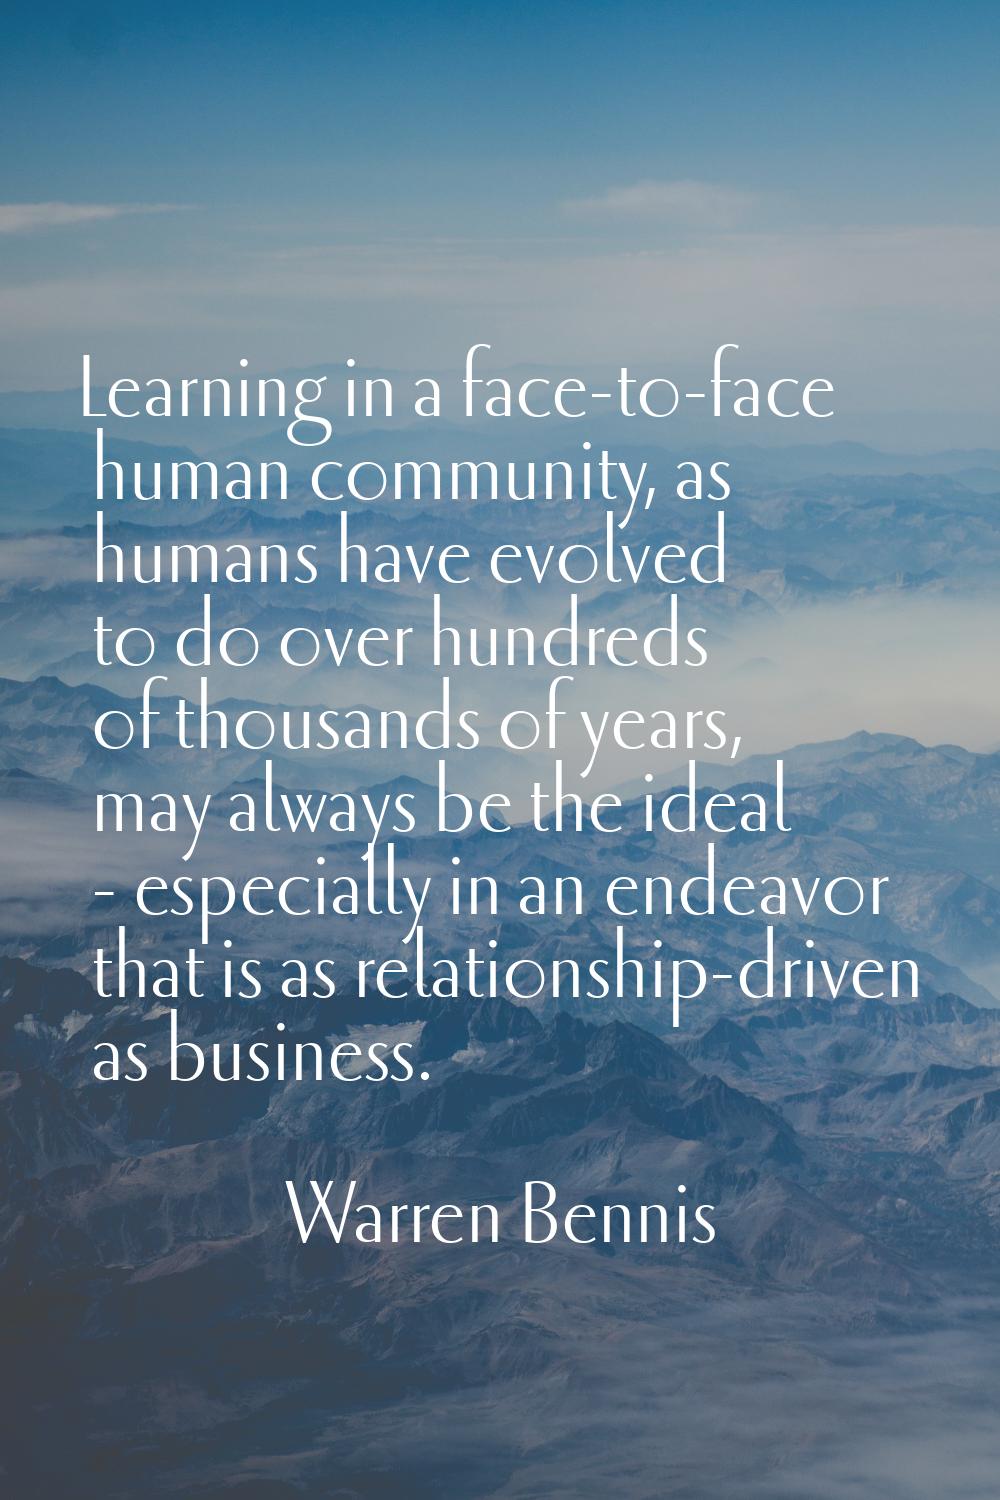 Learning in a face-to-face human community, as humans have evolved to do over hundreds of thousands